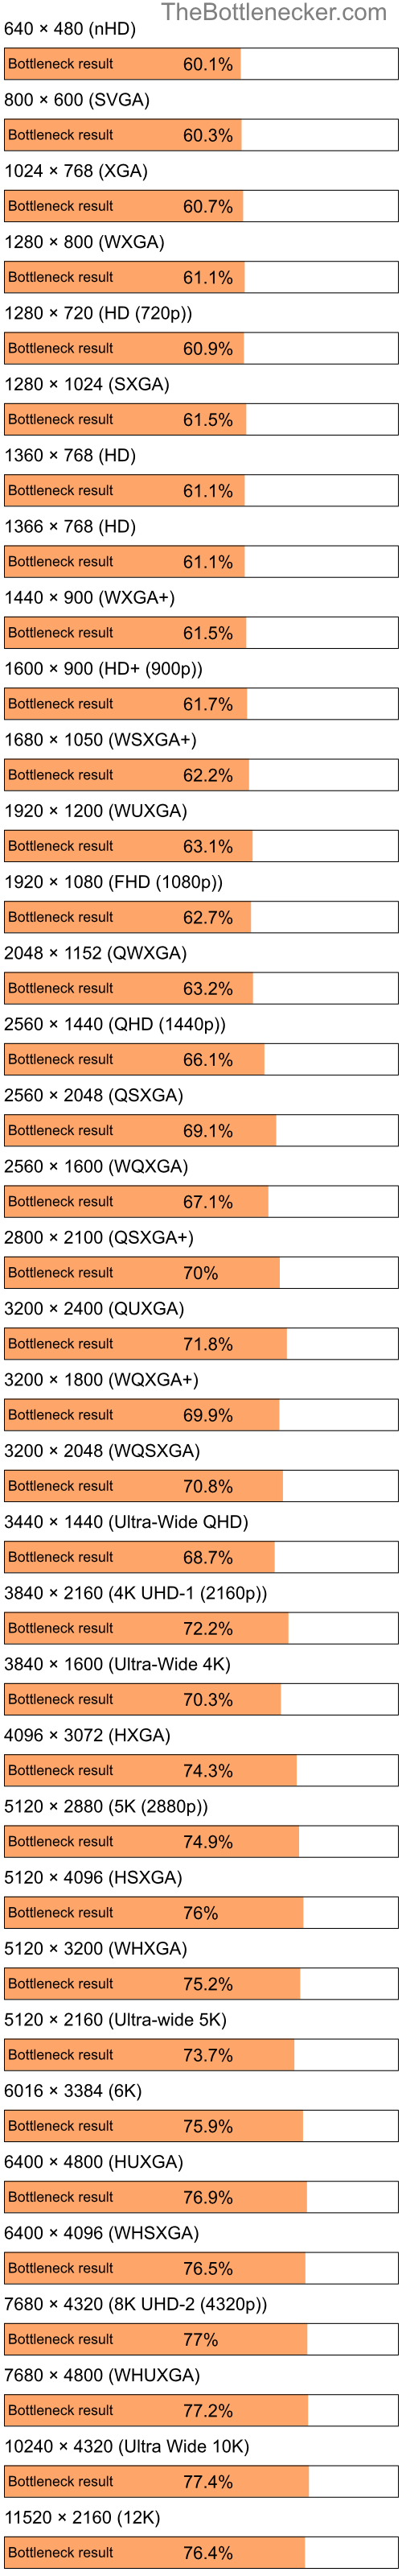 Bottleneck results by resolution for Intel Celeron M 410 and AMD Mobility Radeon X700 in Processor Intense Tasks